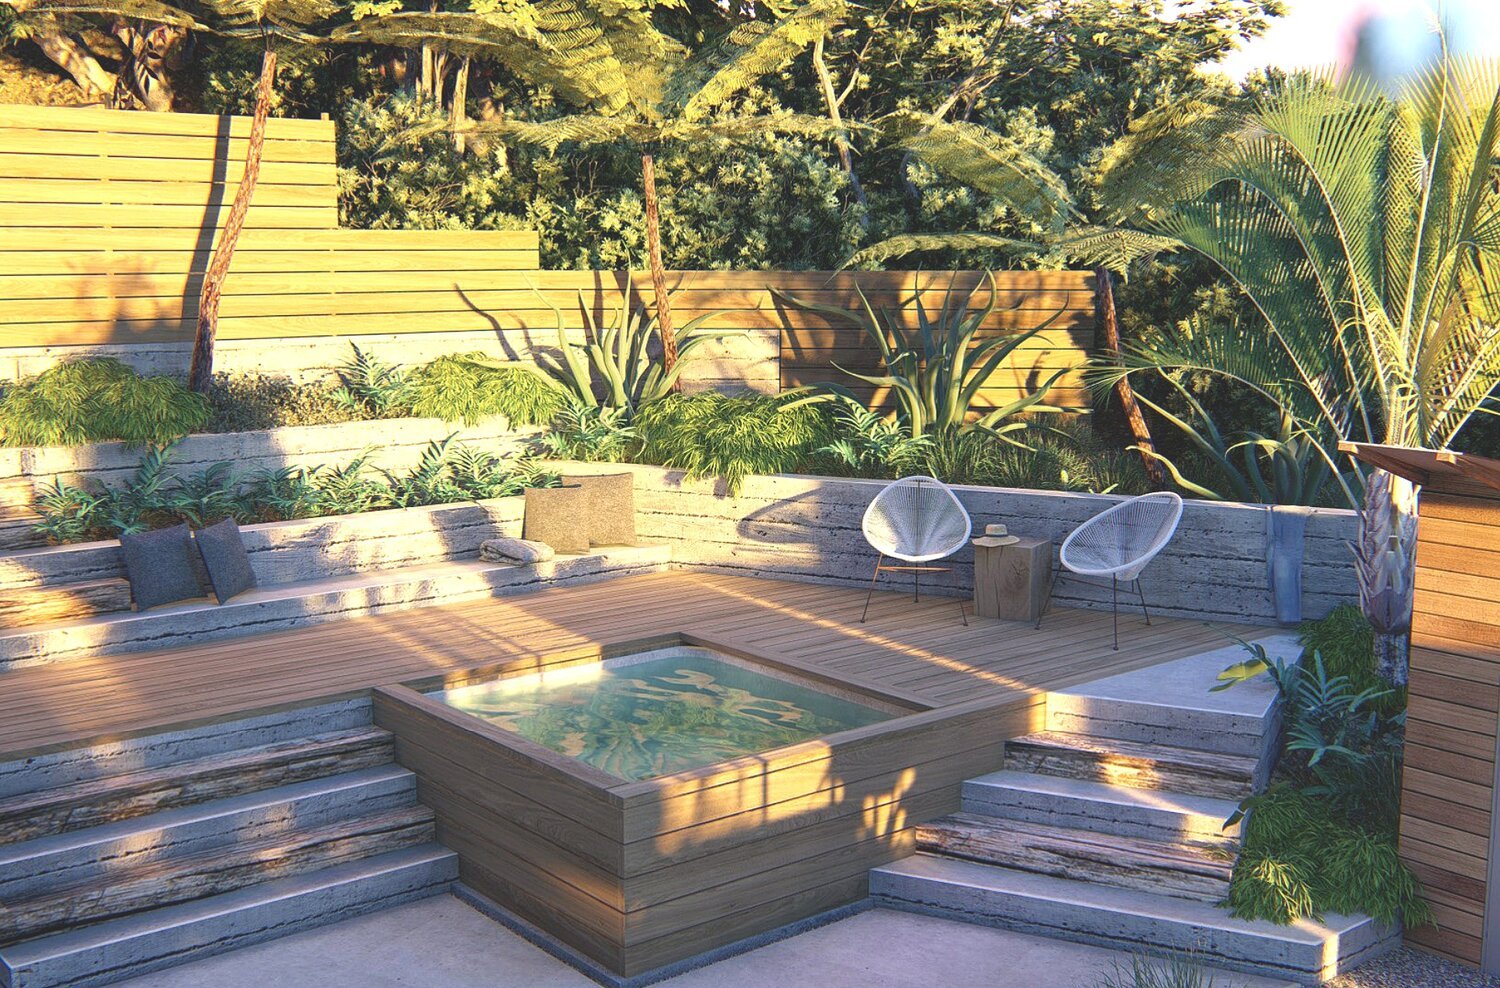 Retaining wall with a sitting area on a deck, a hot tub, and lush plants